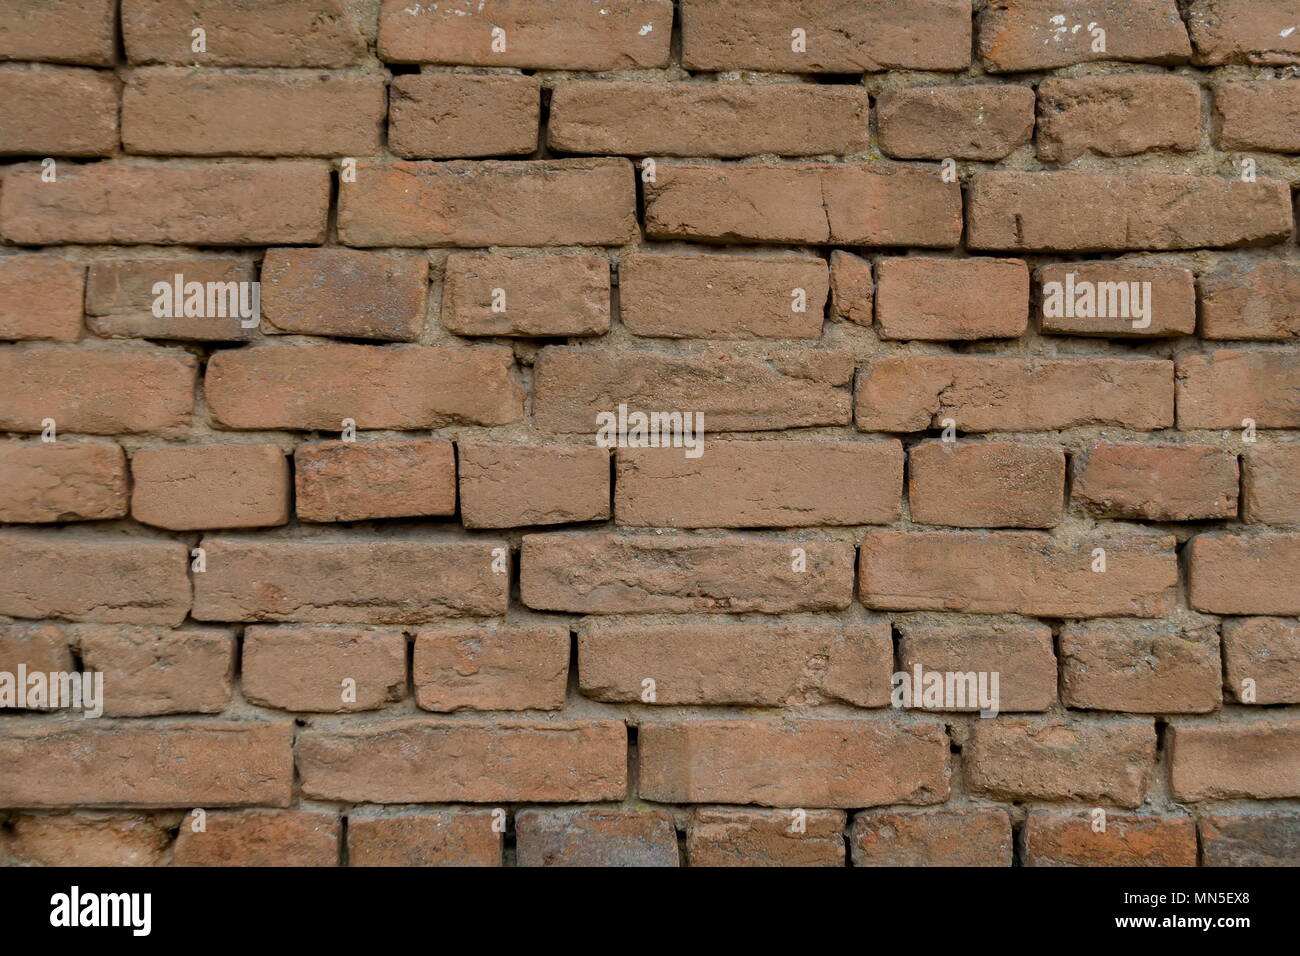 Abstract pattern of an old brick wall for backgrounds and wallpapers, Plana mountain, Bulgaria Stock Photo